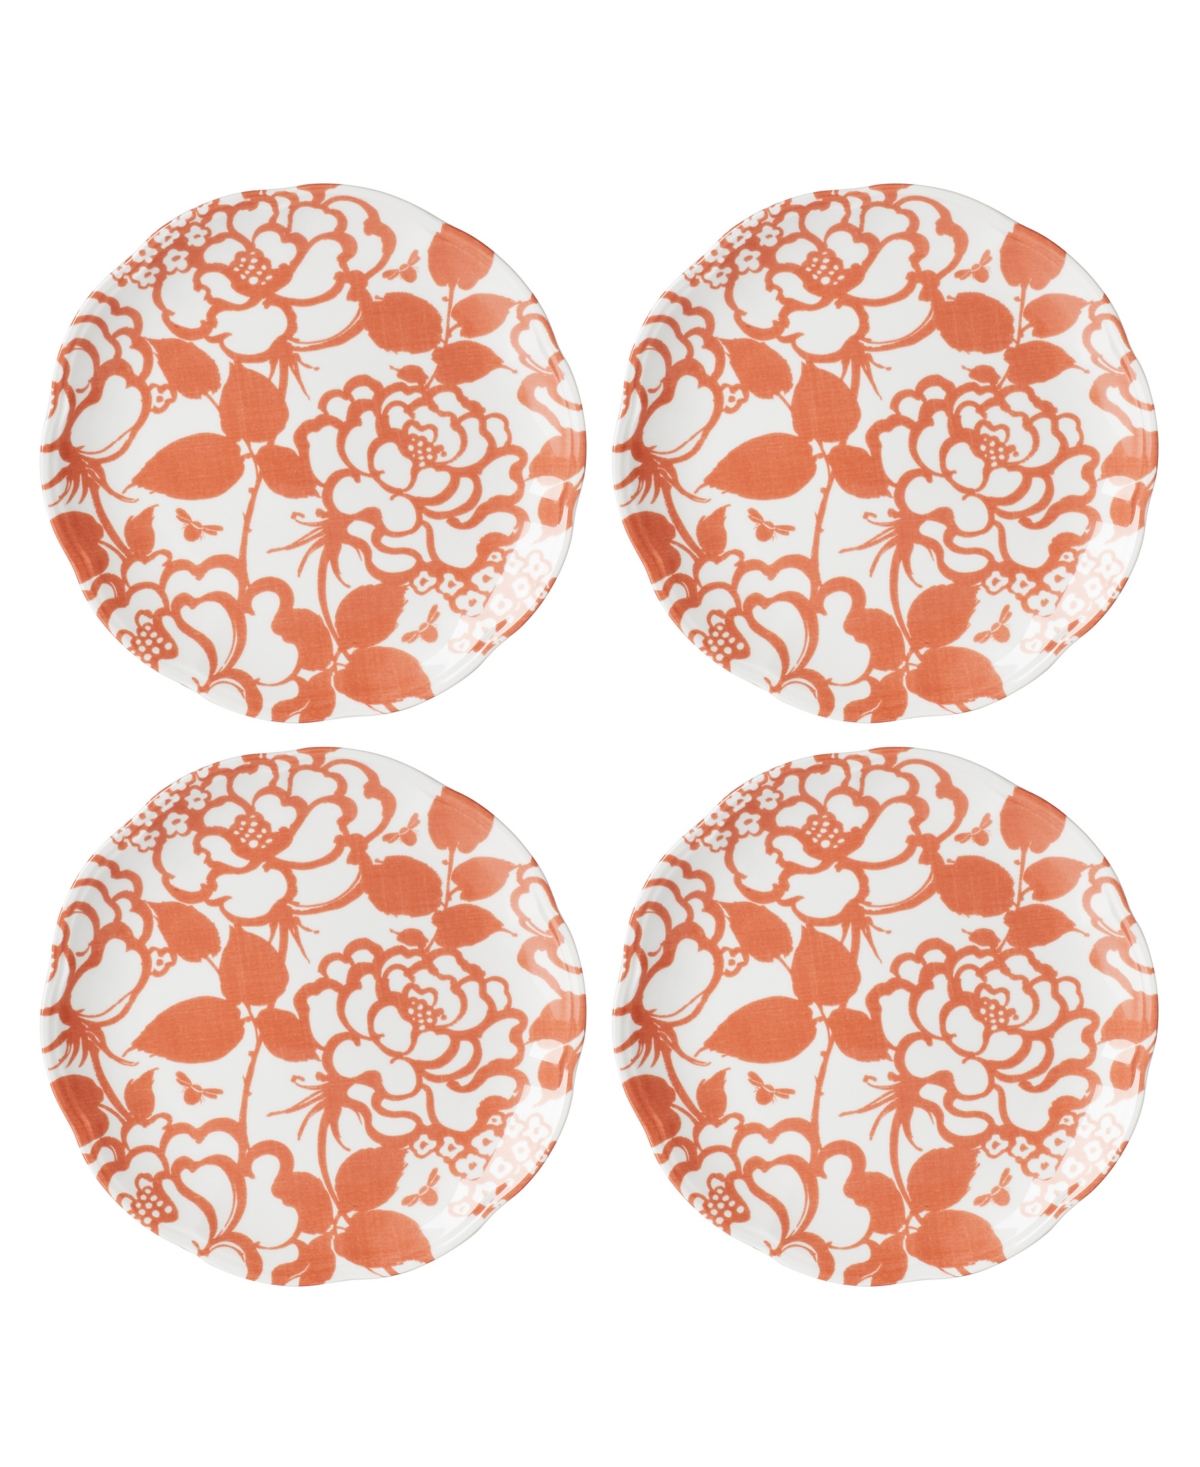 Butterfly Meadow Cottage Accent Plate Set, Set of 4 - goldenrod hue